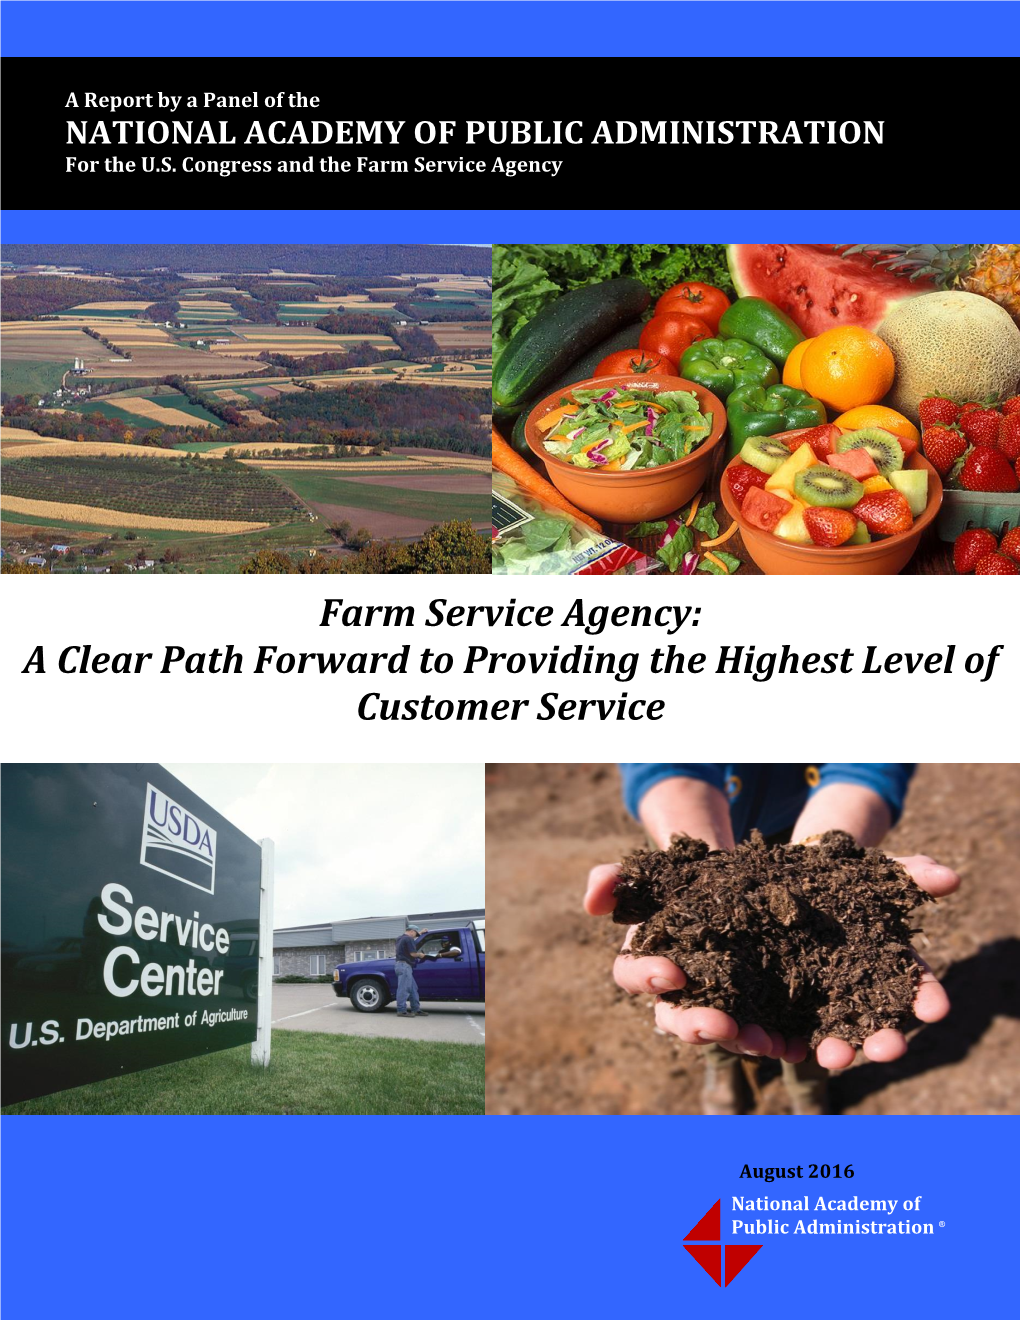 Farm Service Agency: a Clear Path Forward to Providing the Highest Level of Customer Service